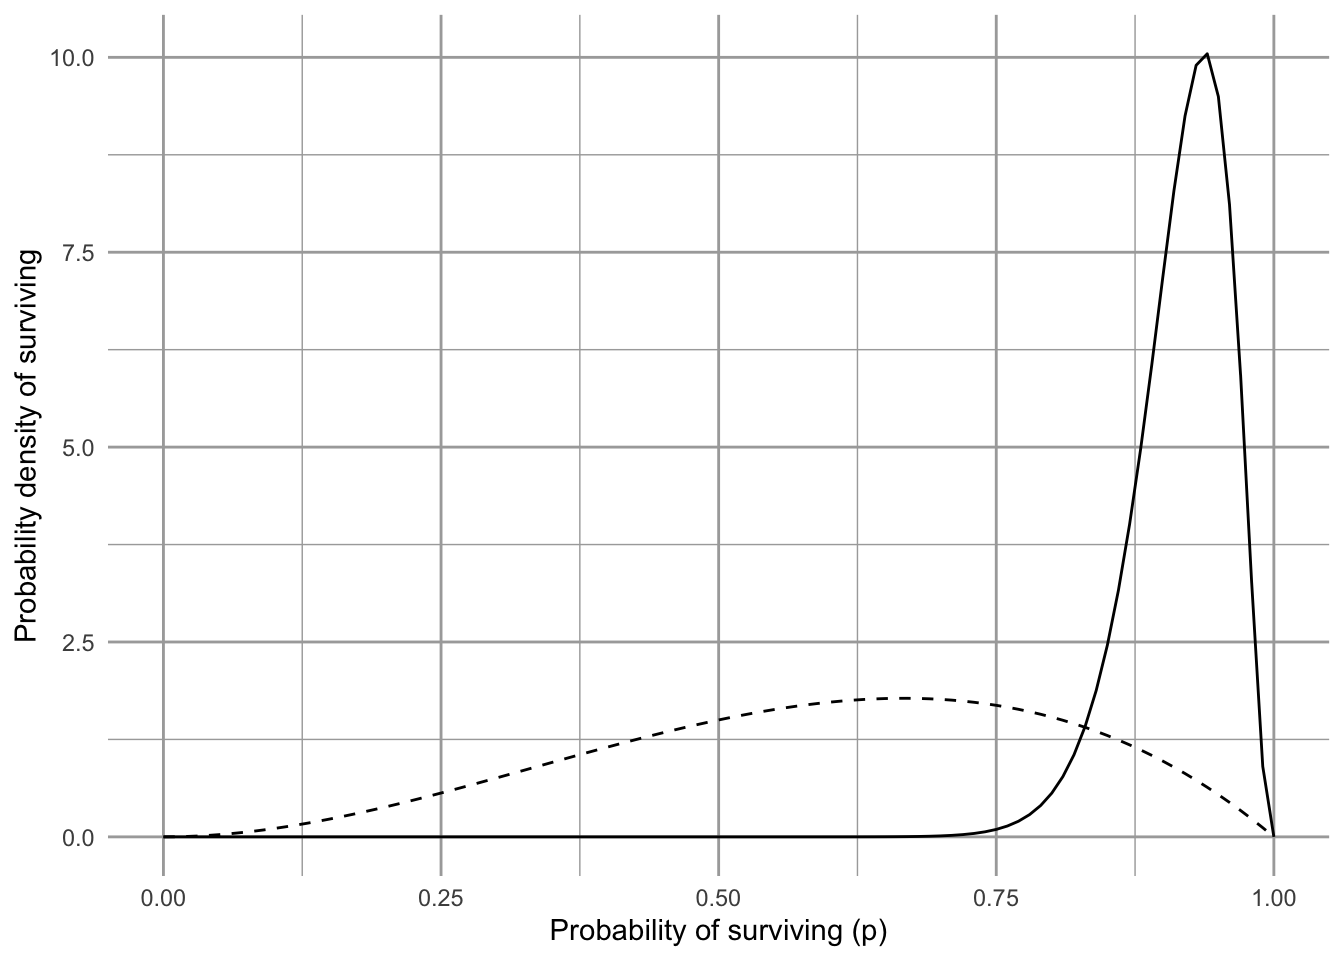 Our updated beliefs (solid line) about the probability that the Song Sparrows will replace themselves over our time interval. The solid line is the posterior distribution. The dashed line was our prior beliefs or prior distribution.